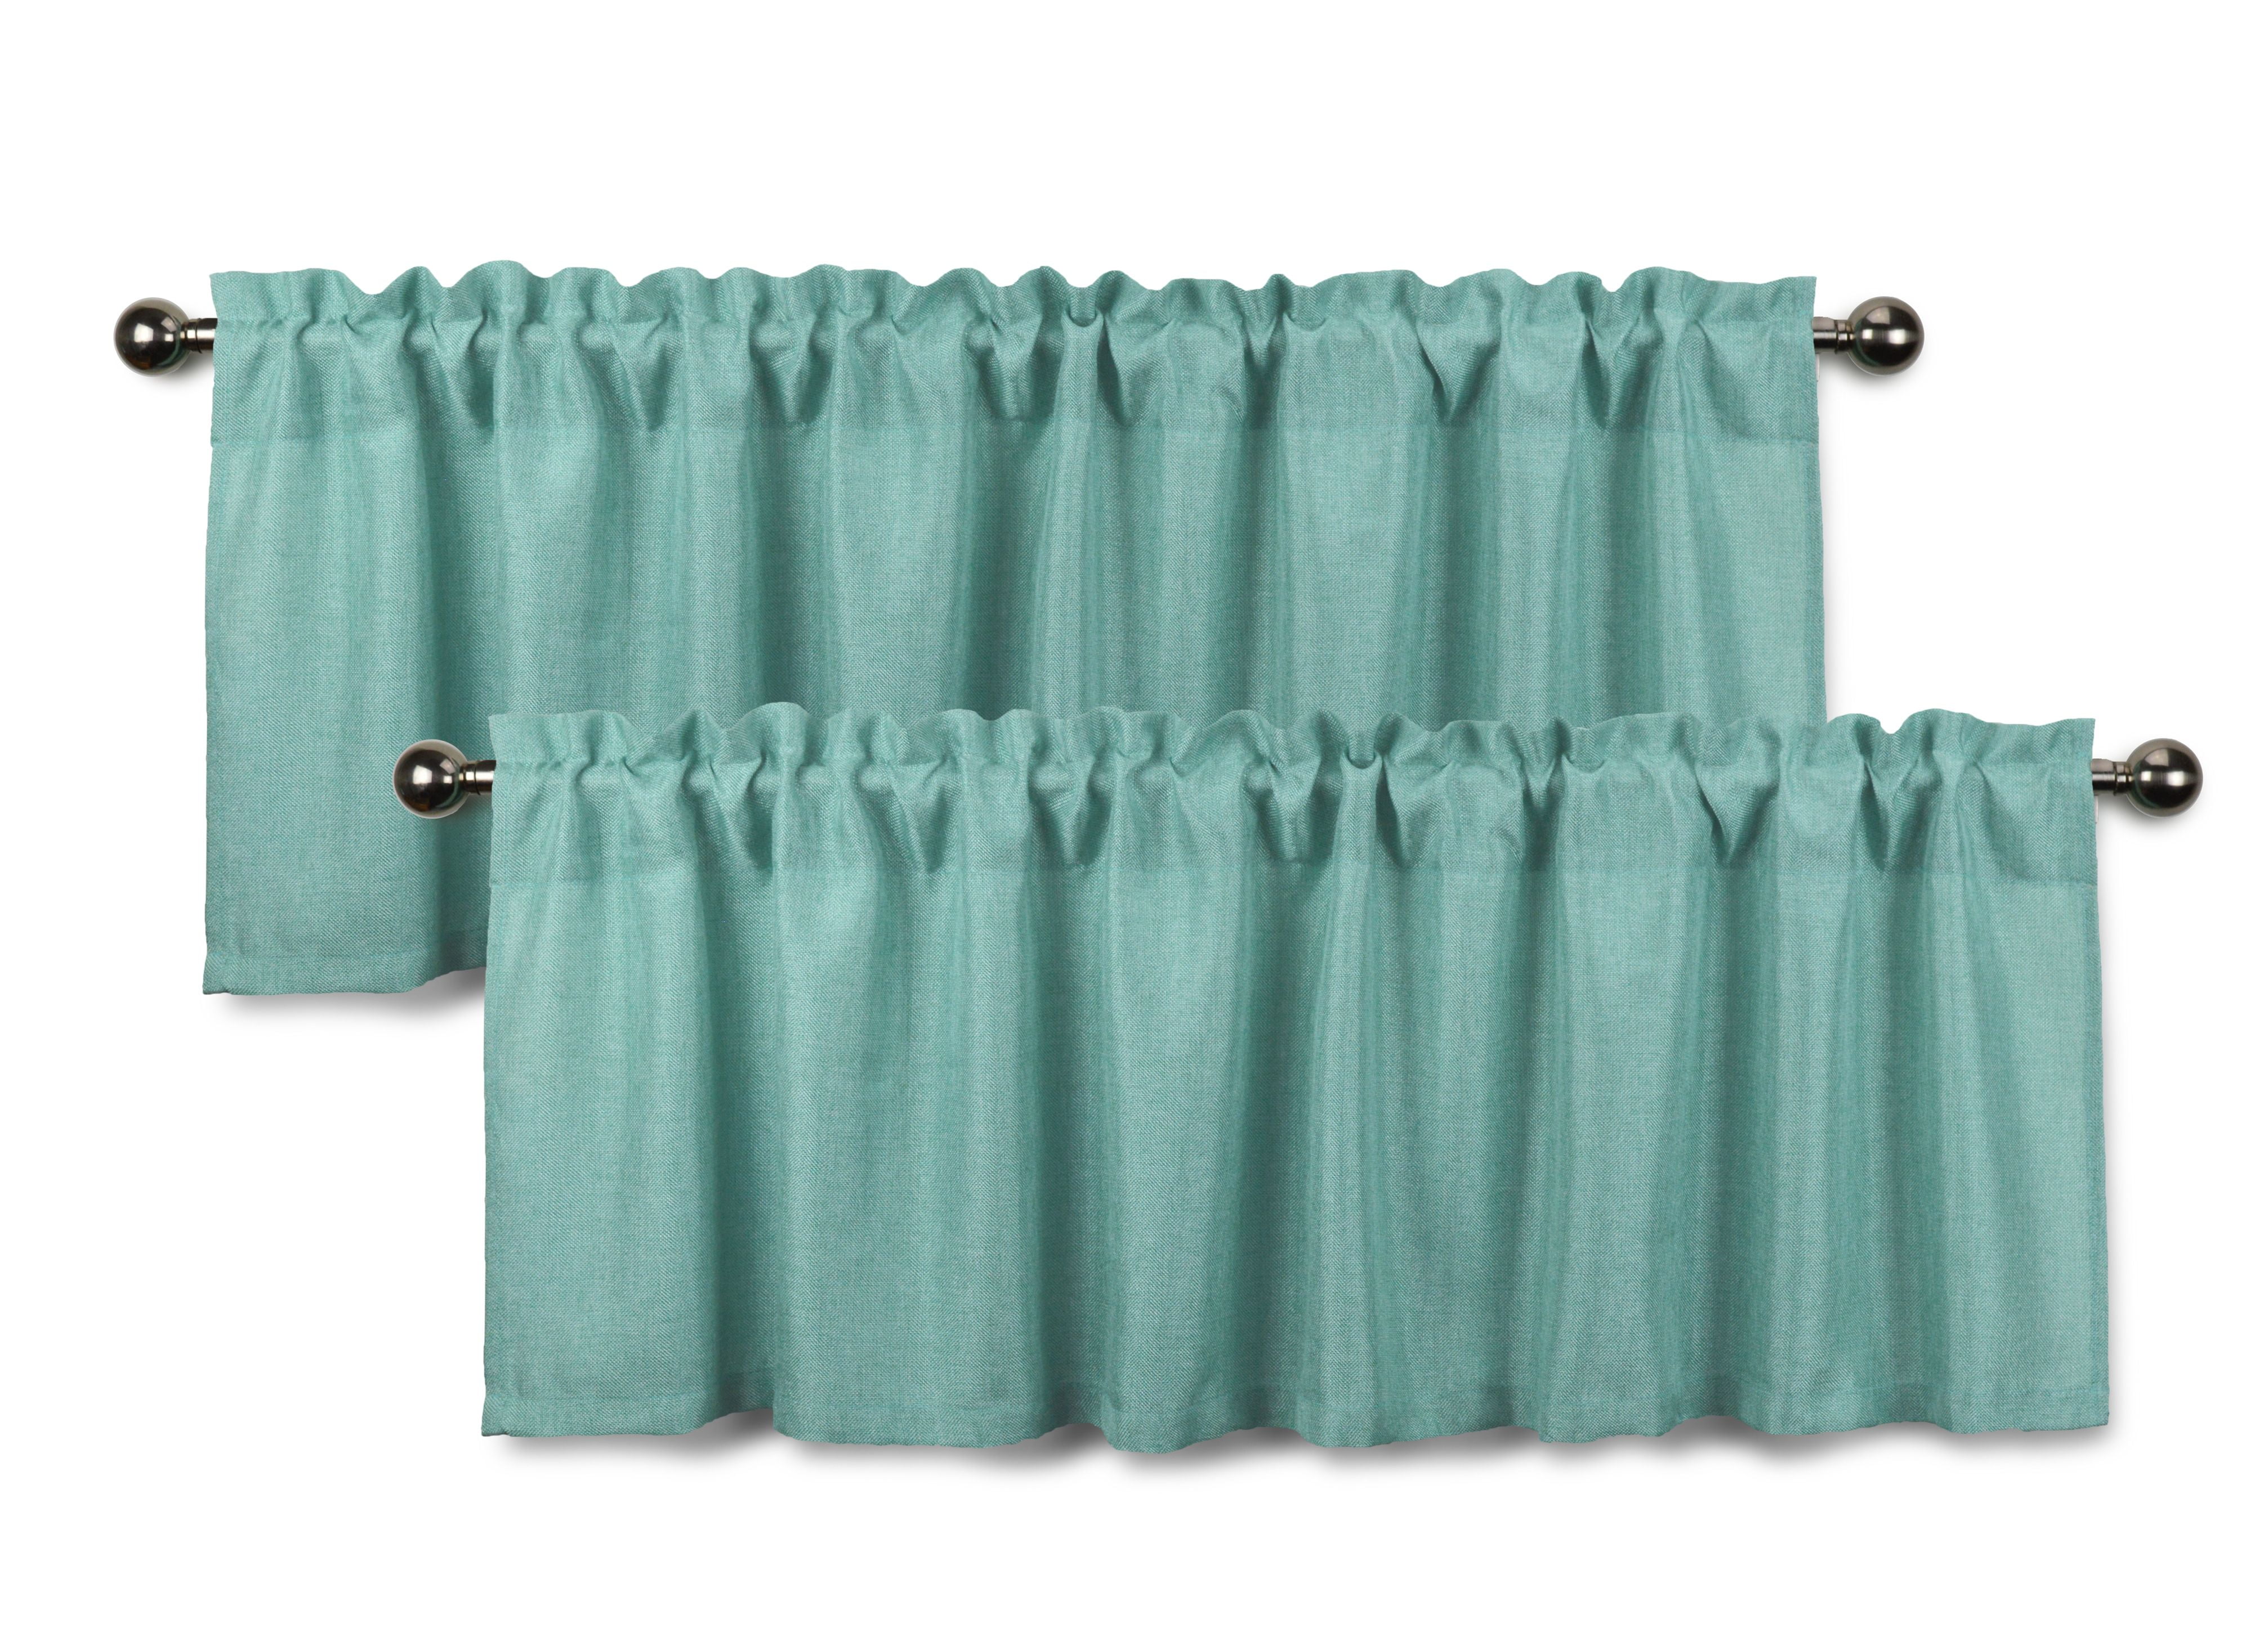 Aiking Home Rod Pocket Faux Linen, Green Valance Curtains